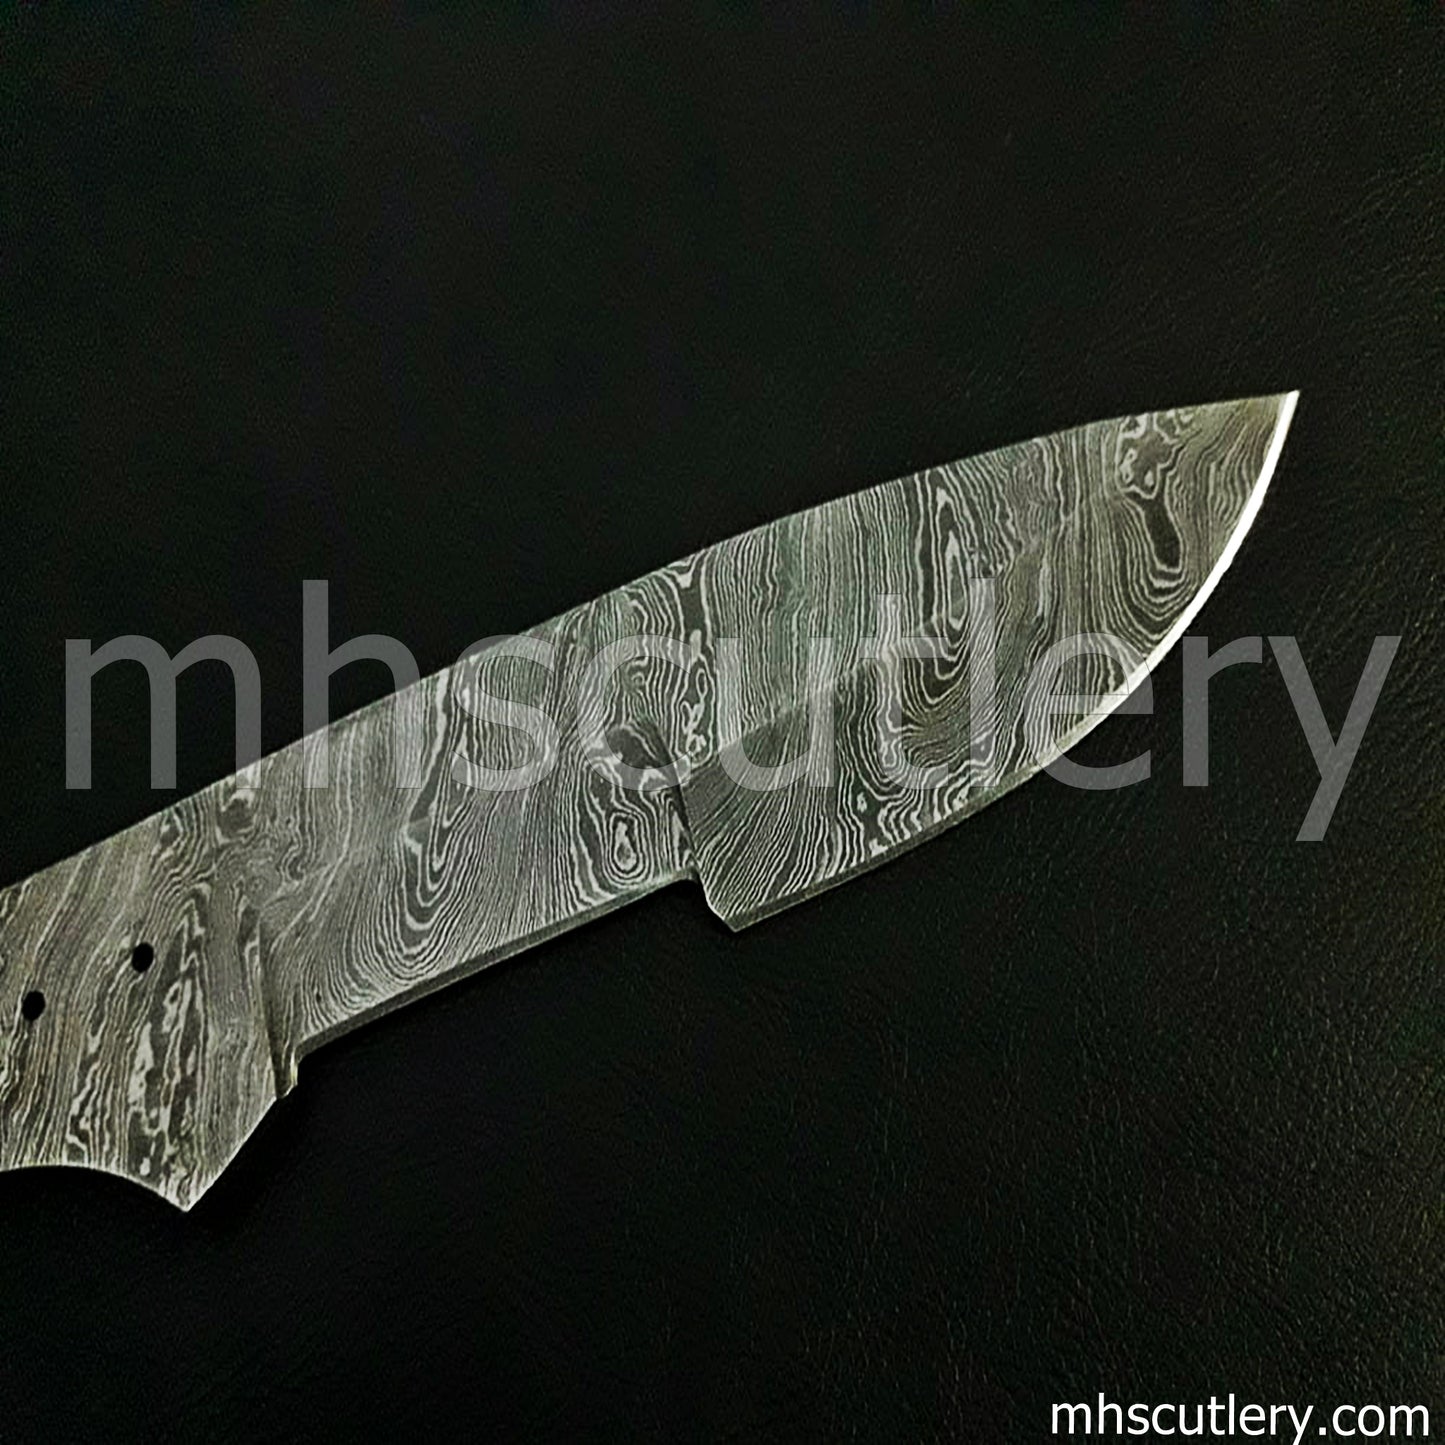 Custom Hand Forged Damascus Steel Tactical Hunter Blank Blade For Knife Makers | mhscutlery